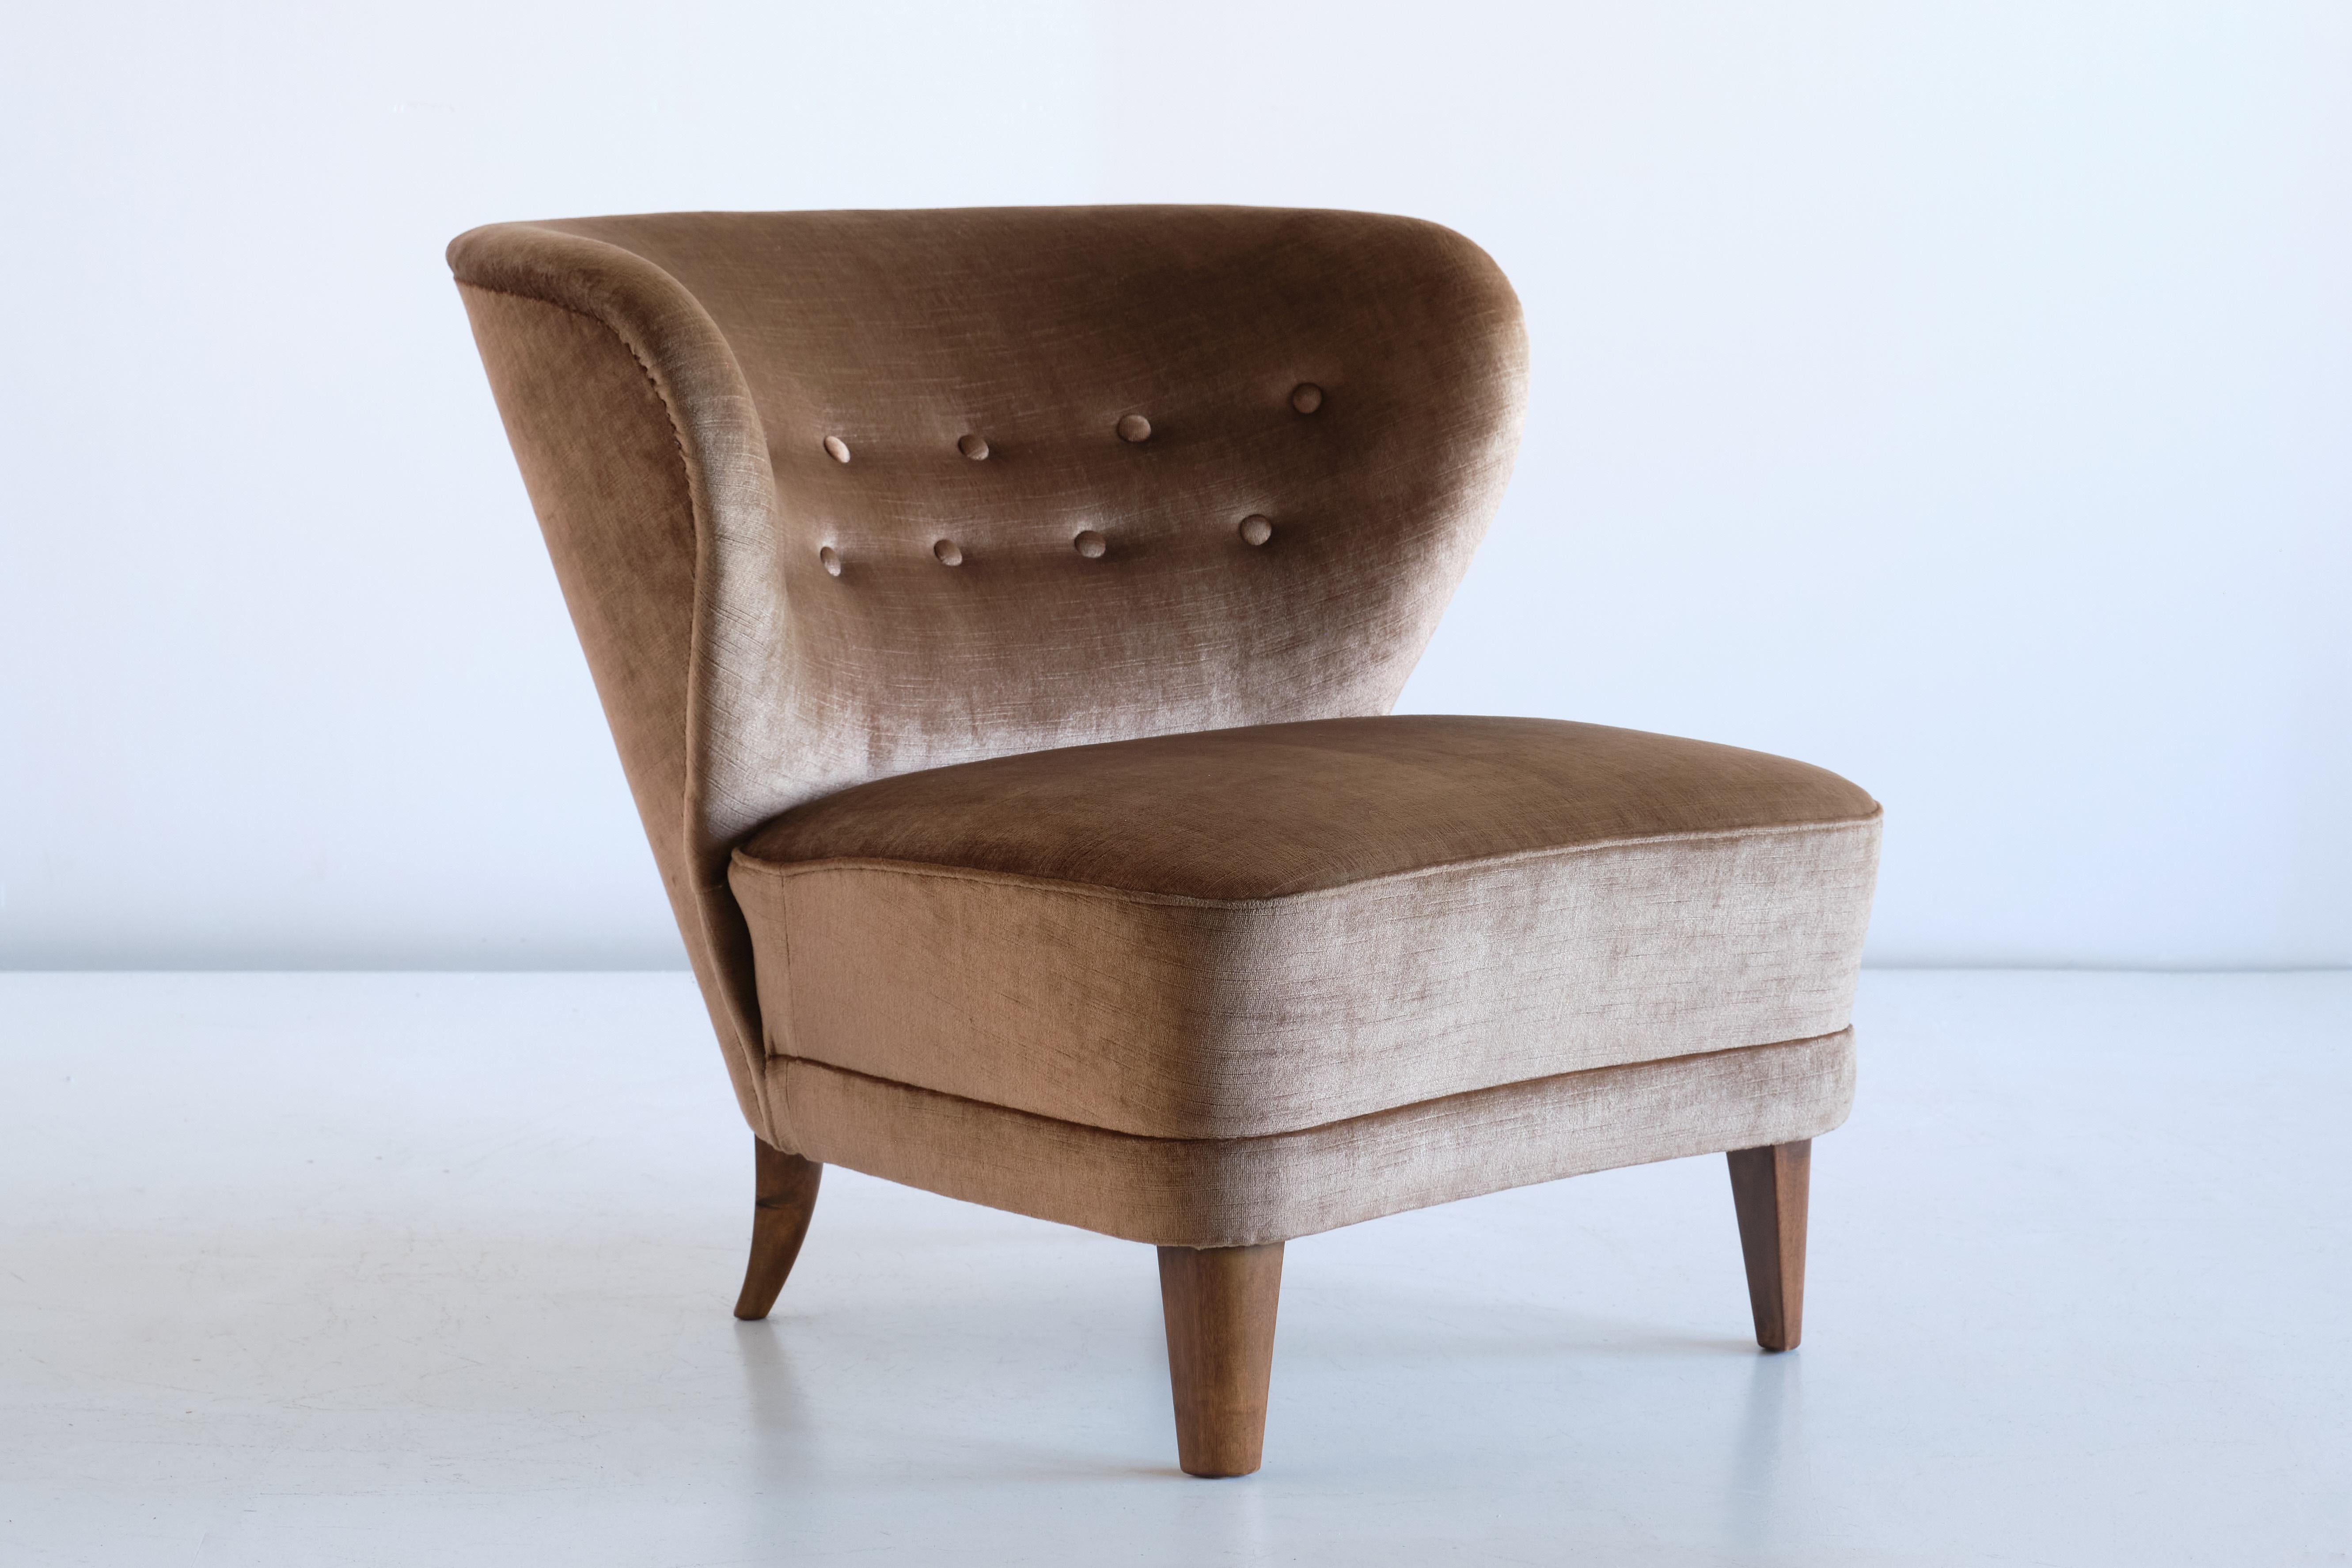 This rare lounge chair was designed by Gösta Jonsson and produced in Jönköping, Sweden in the late 1940s. The beautifully curved backrest with tufted buttons make this a very comfortable and embracing chair. The original brown velvet upholstery has